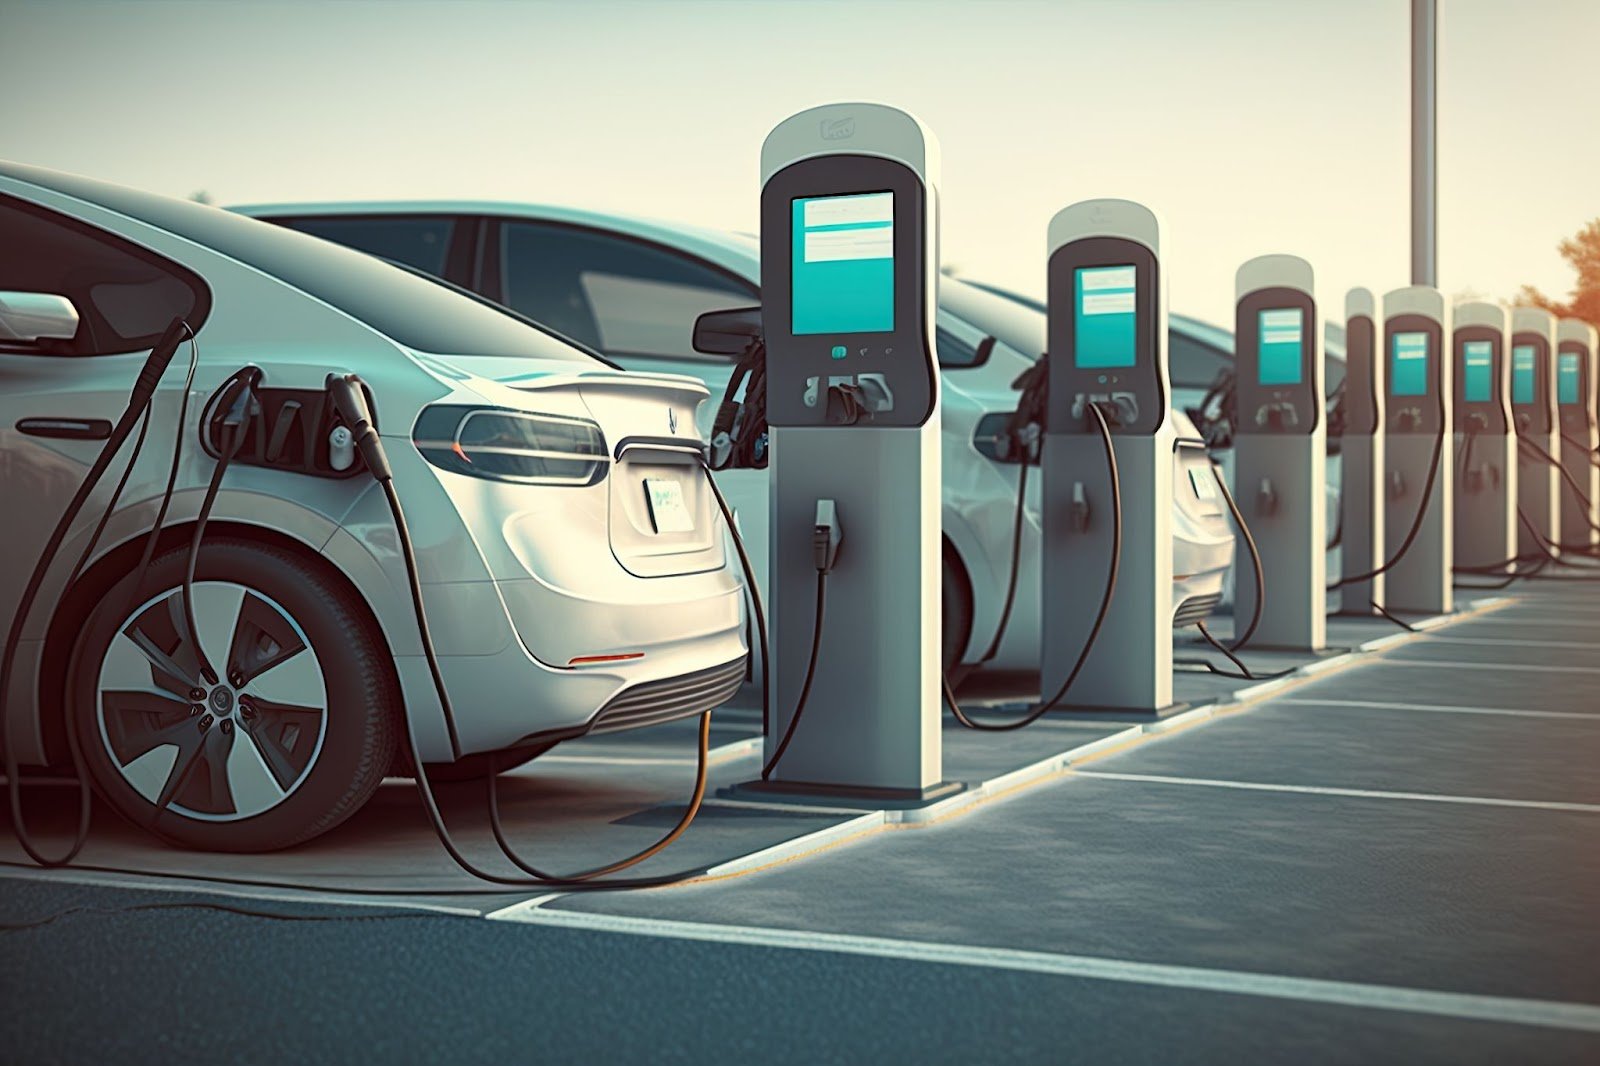 The Role of City Infrastructure in Advancing EV Adoption